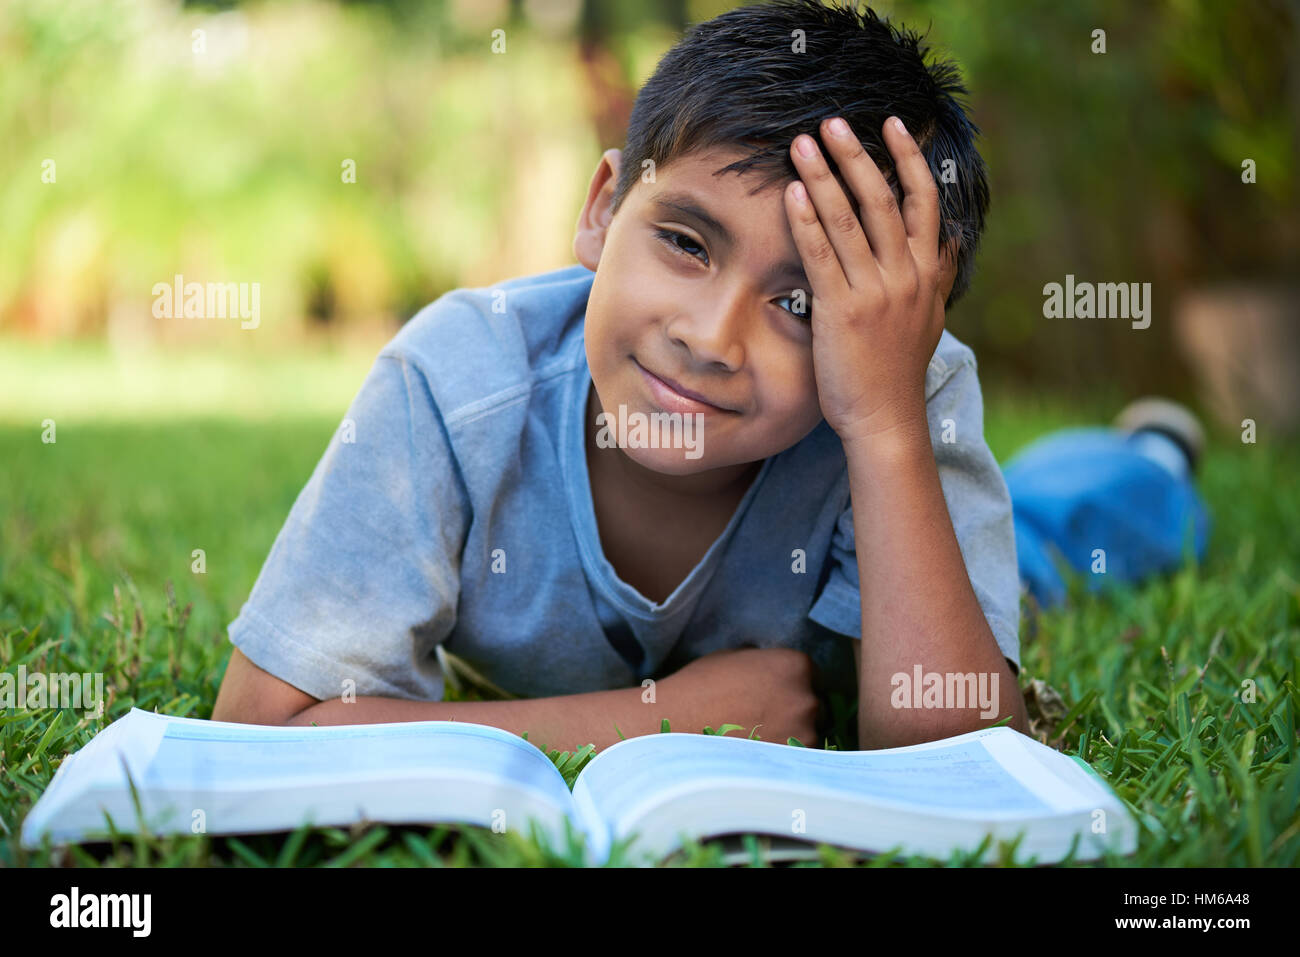 kid tired holding his head while reading a book Stock Photo